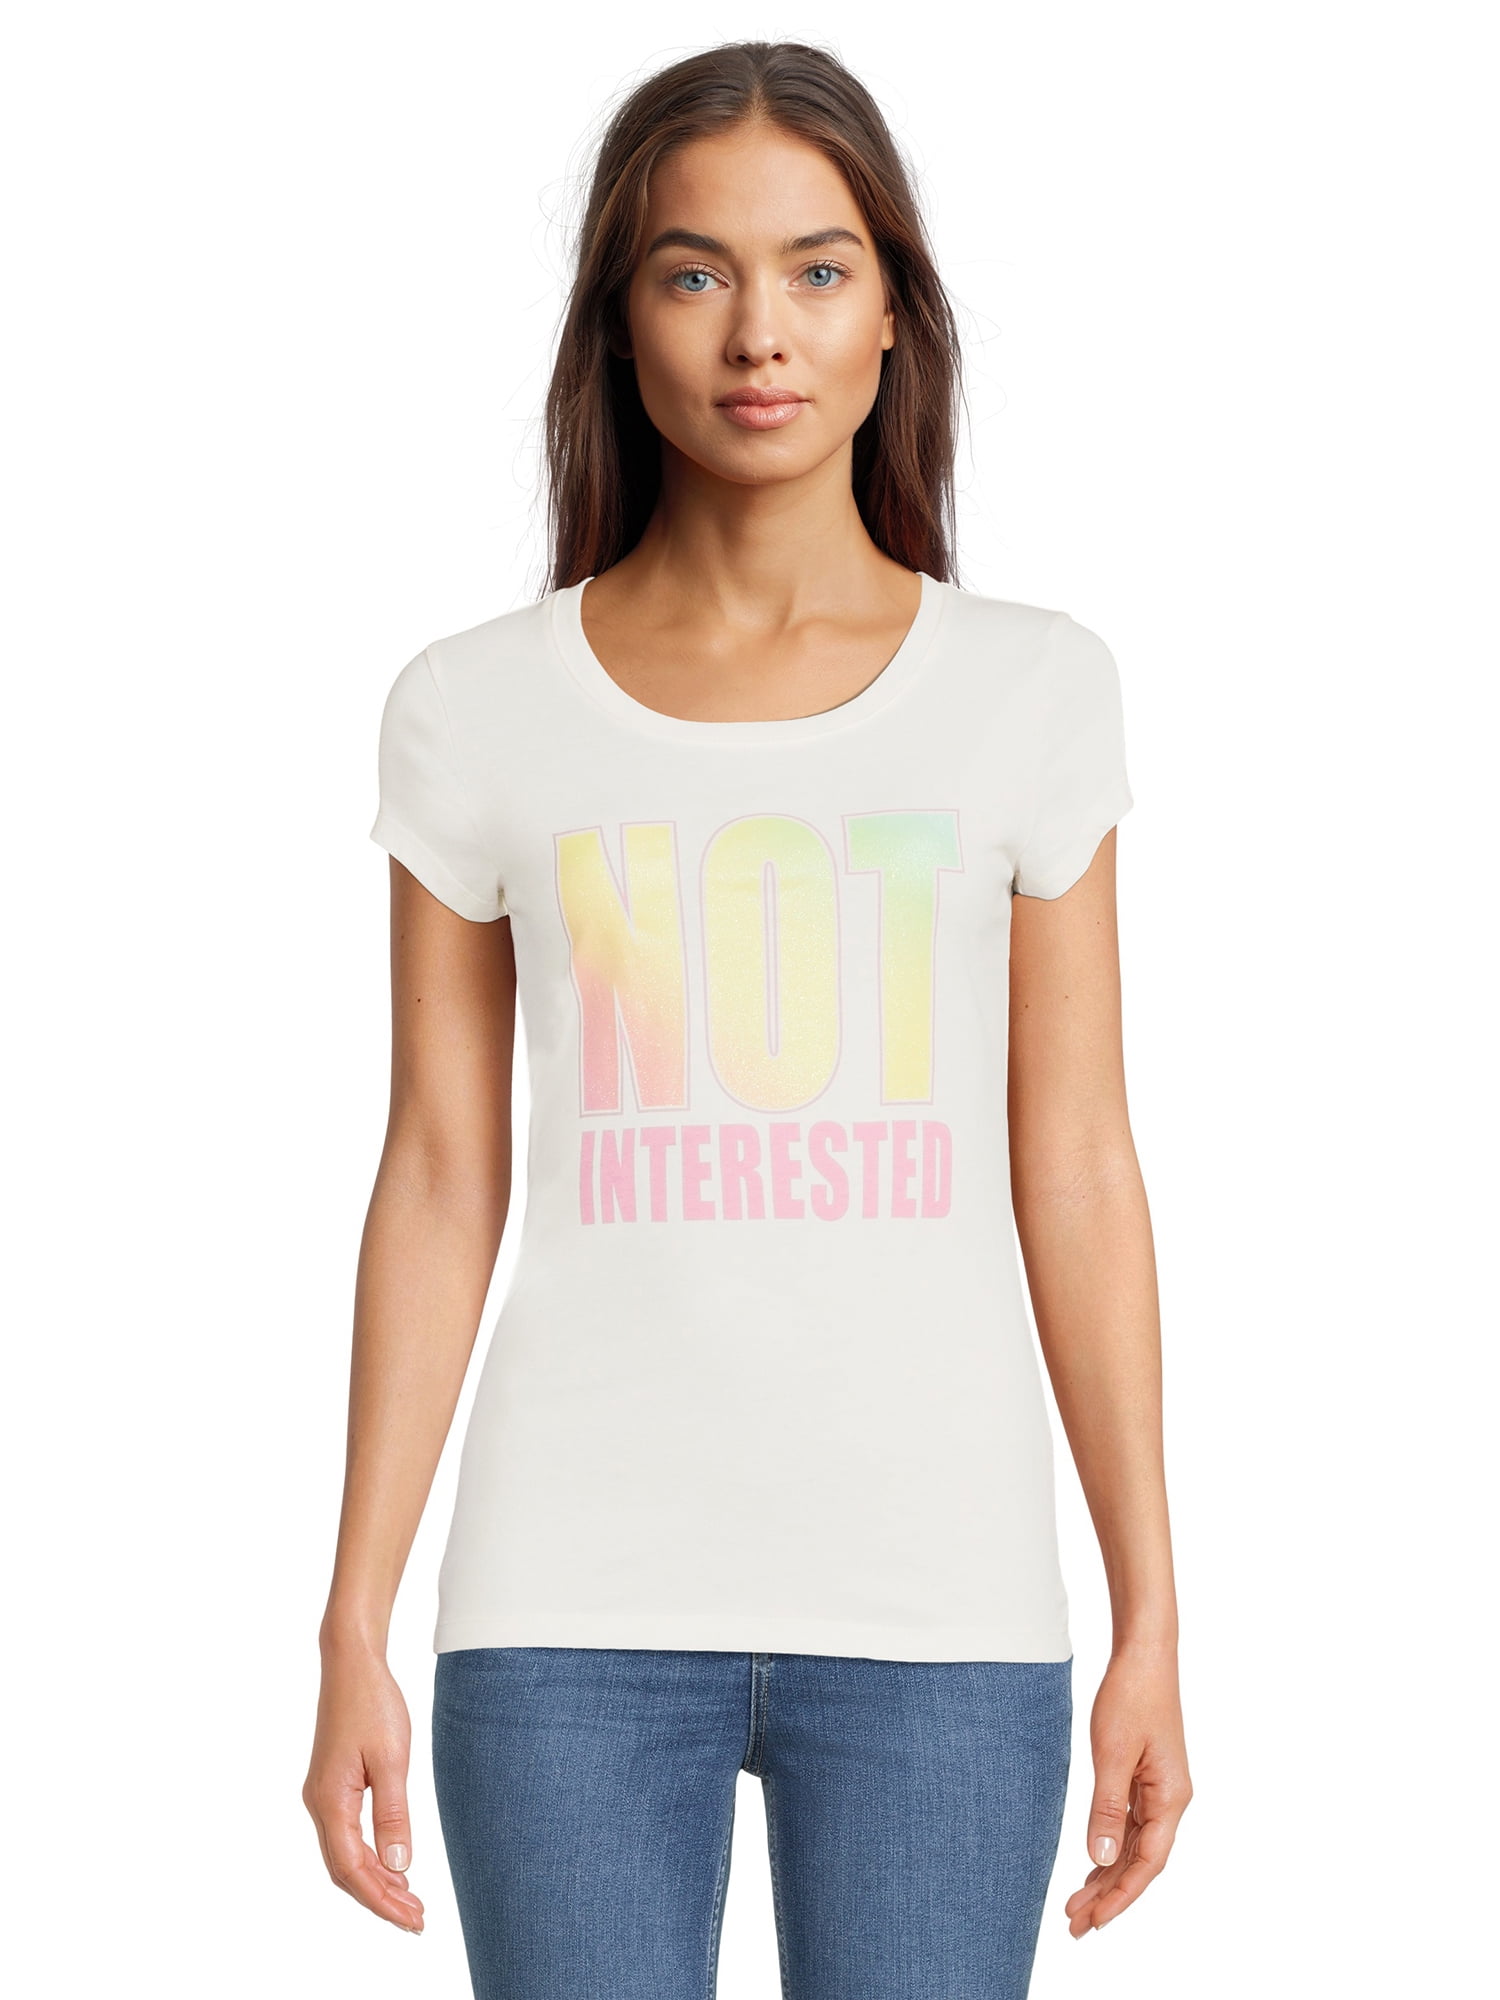 LICENSE Not Interested Women's Short Sleeve Graphic Tee